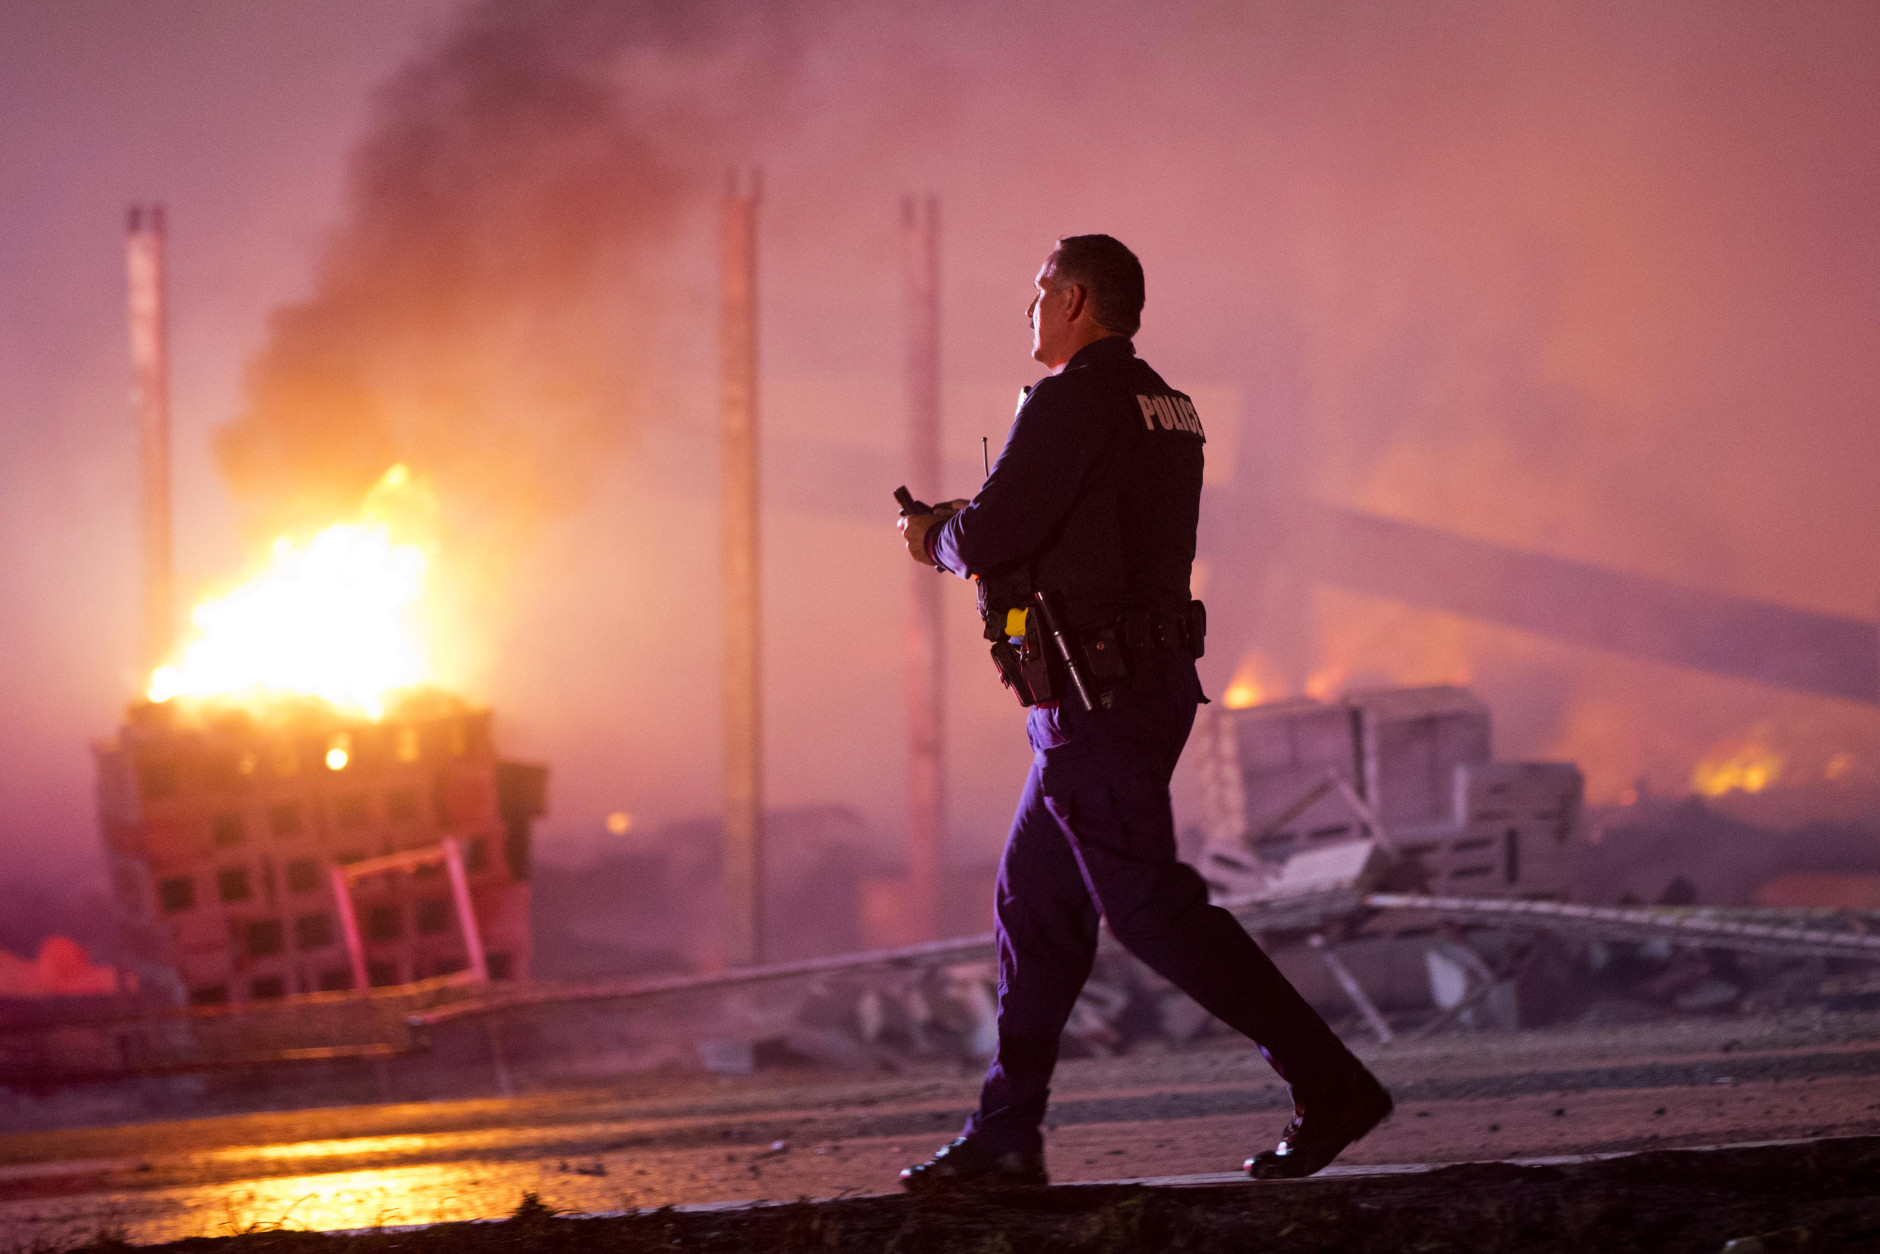 A police officer walks by a blaze, Monday, April 27, 2015, after rioters plunged part of Baltimore into chaos, torching a pharmacy, setting police cars ablaze and throwing bricks at officers. (AP Photo/Matt Rourke)